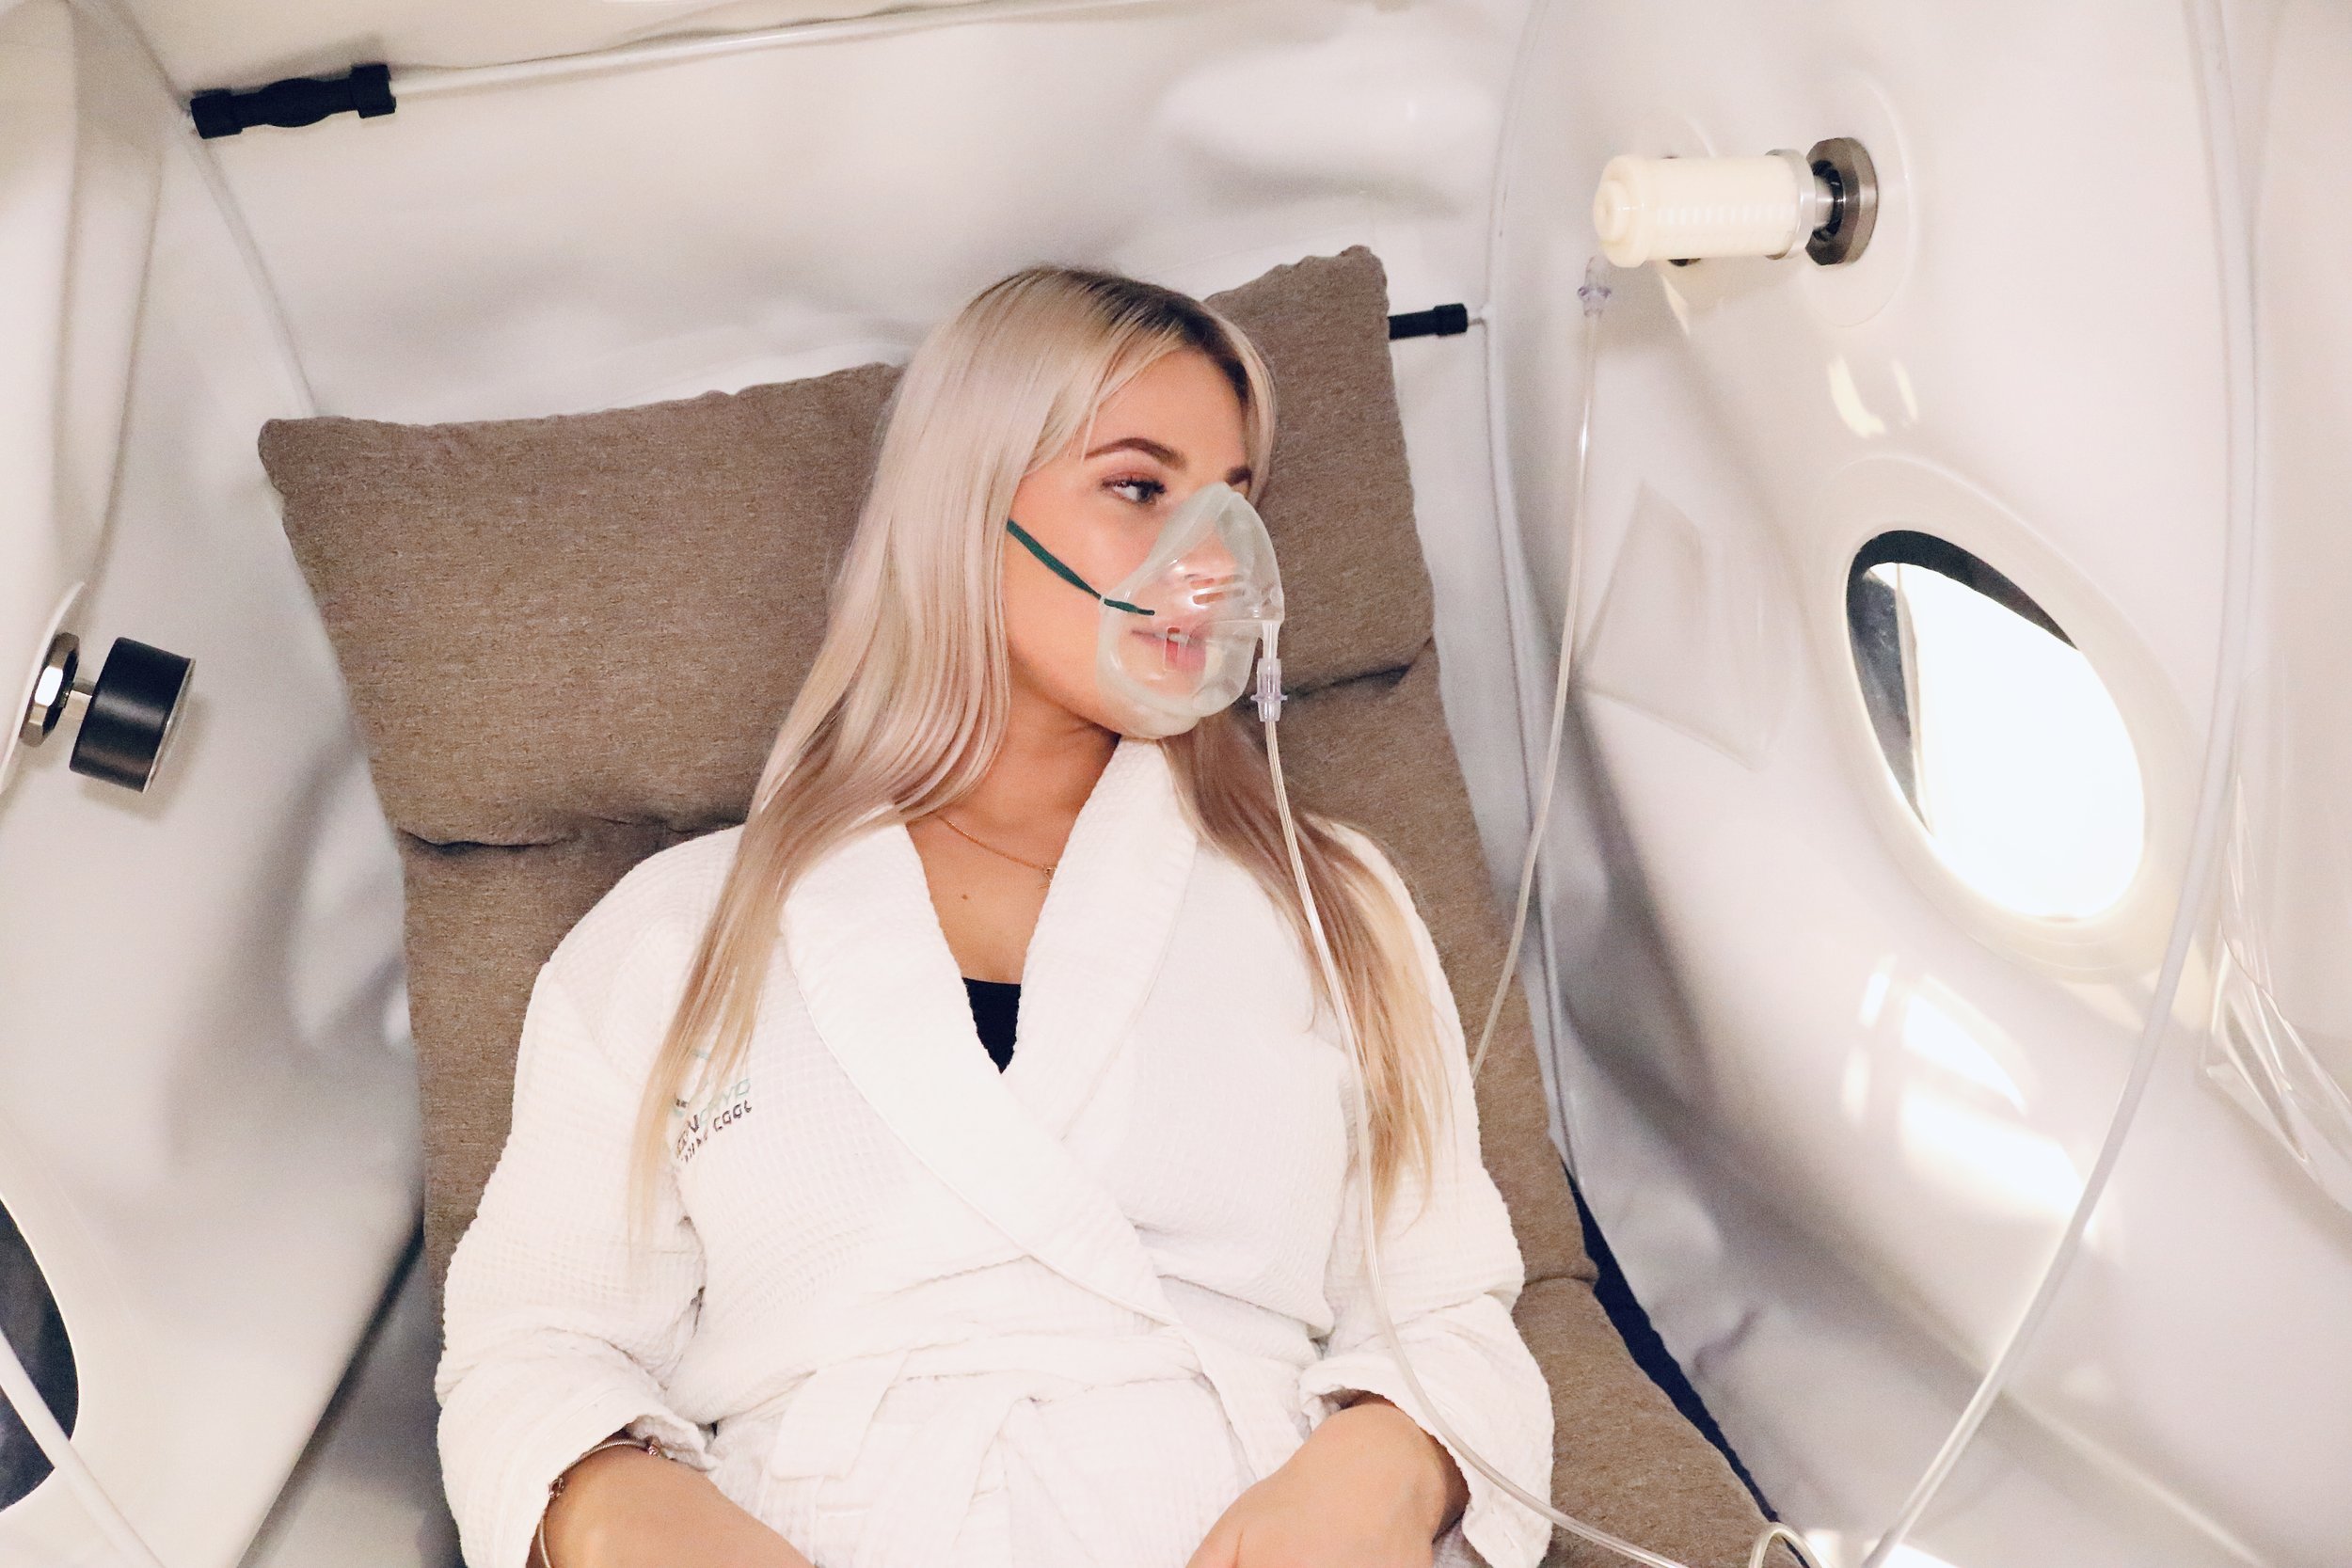 HYPERBARIC OXYGEN THERAPY 